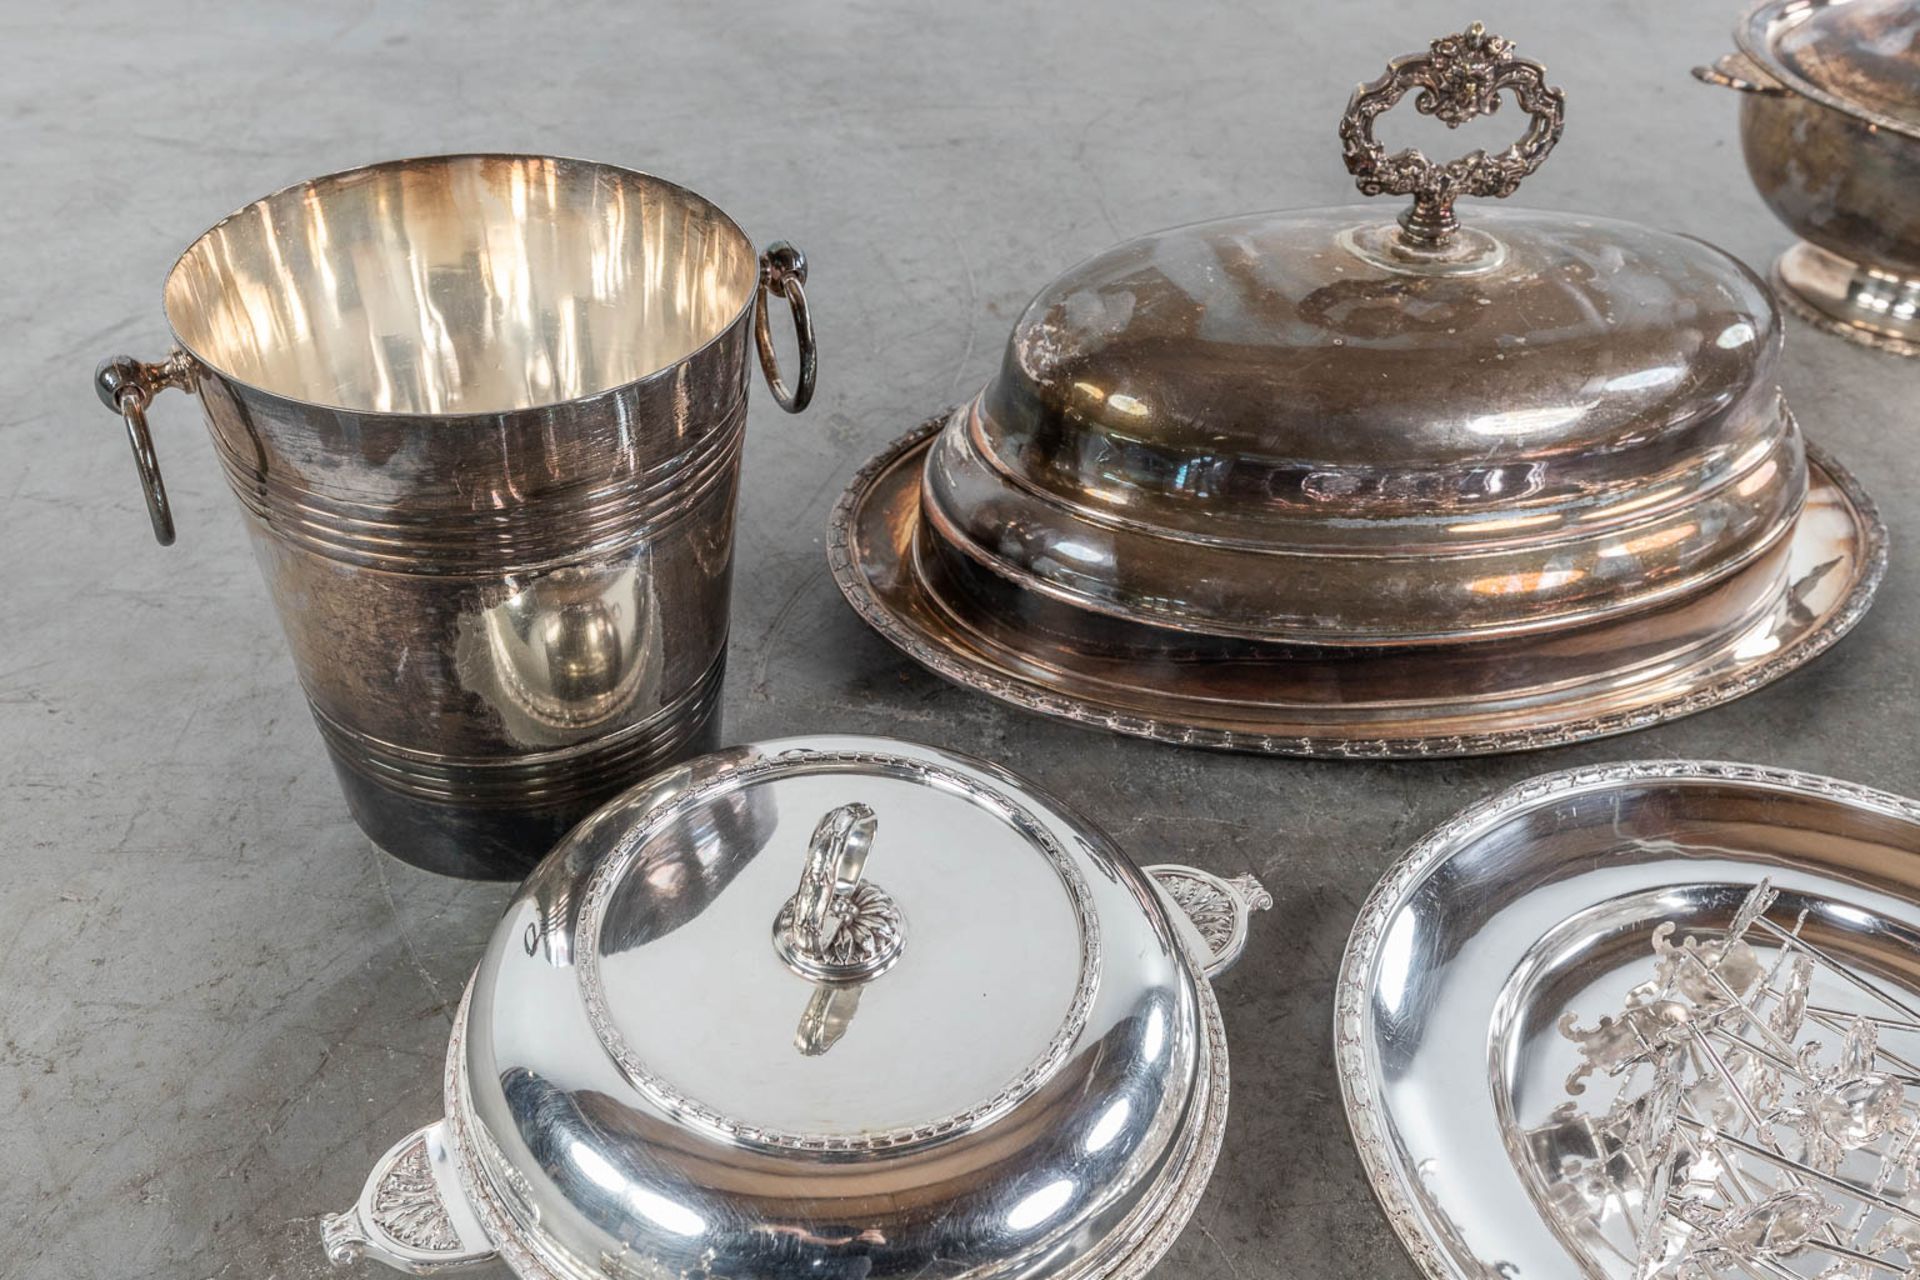 A large collection of table accessories and serving ware, silver-plated metal. (L: 32 x W: 48 cm) - Image 8 of 10